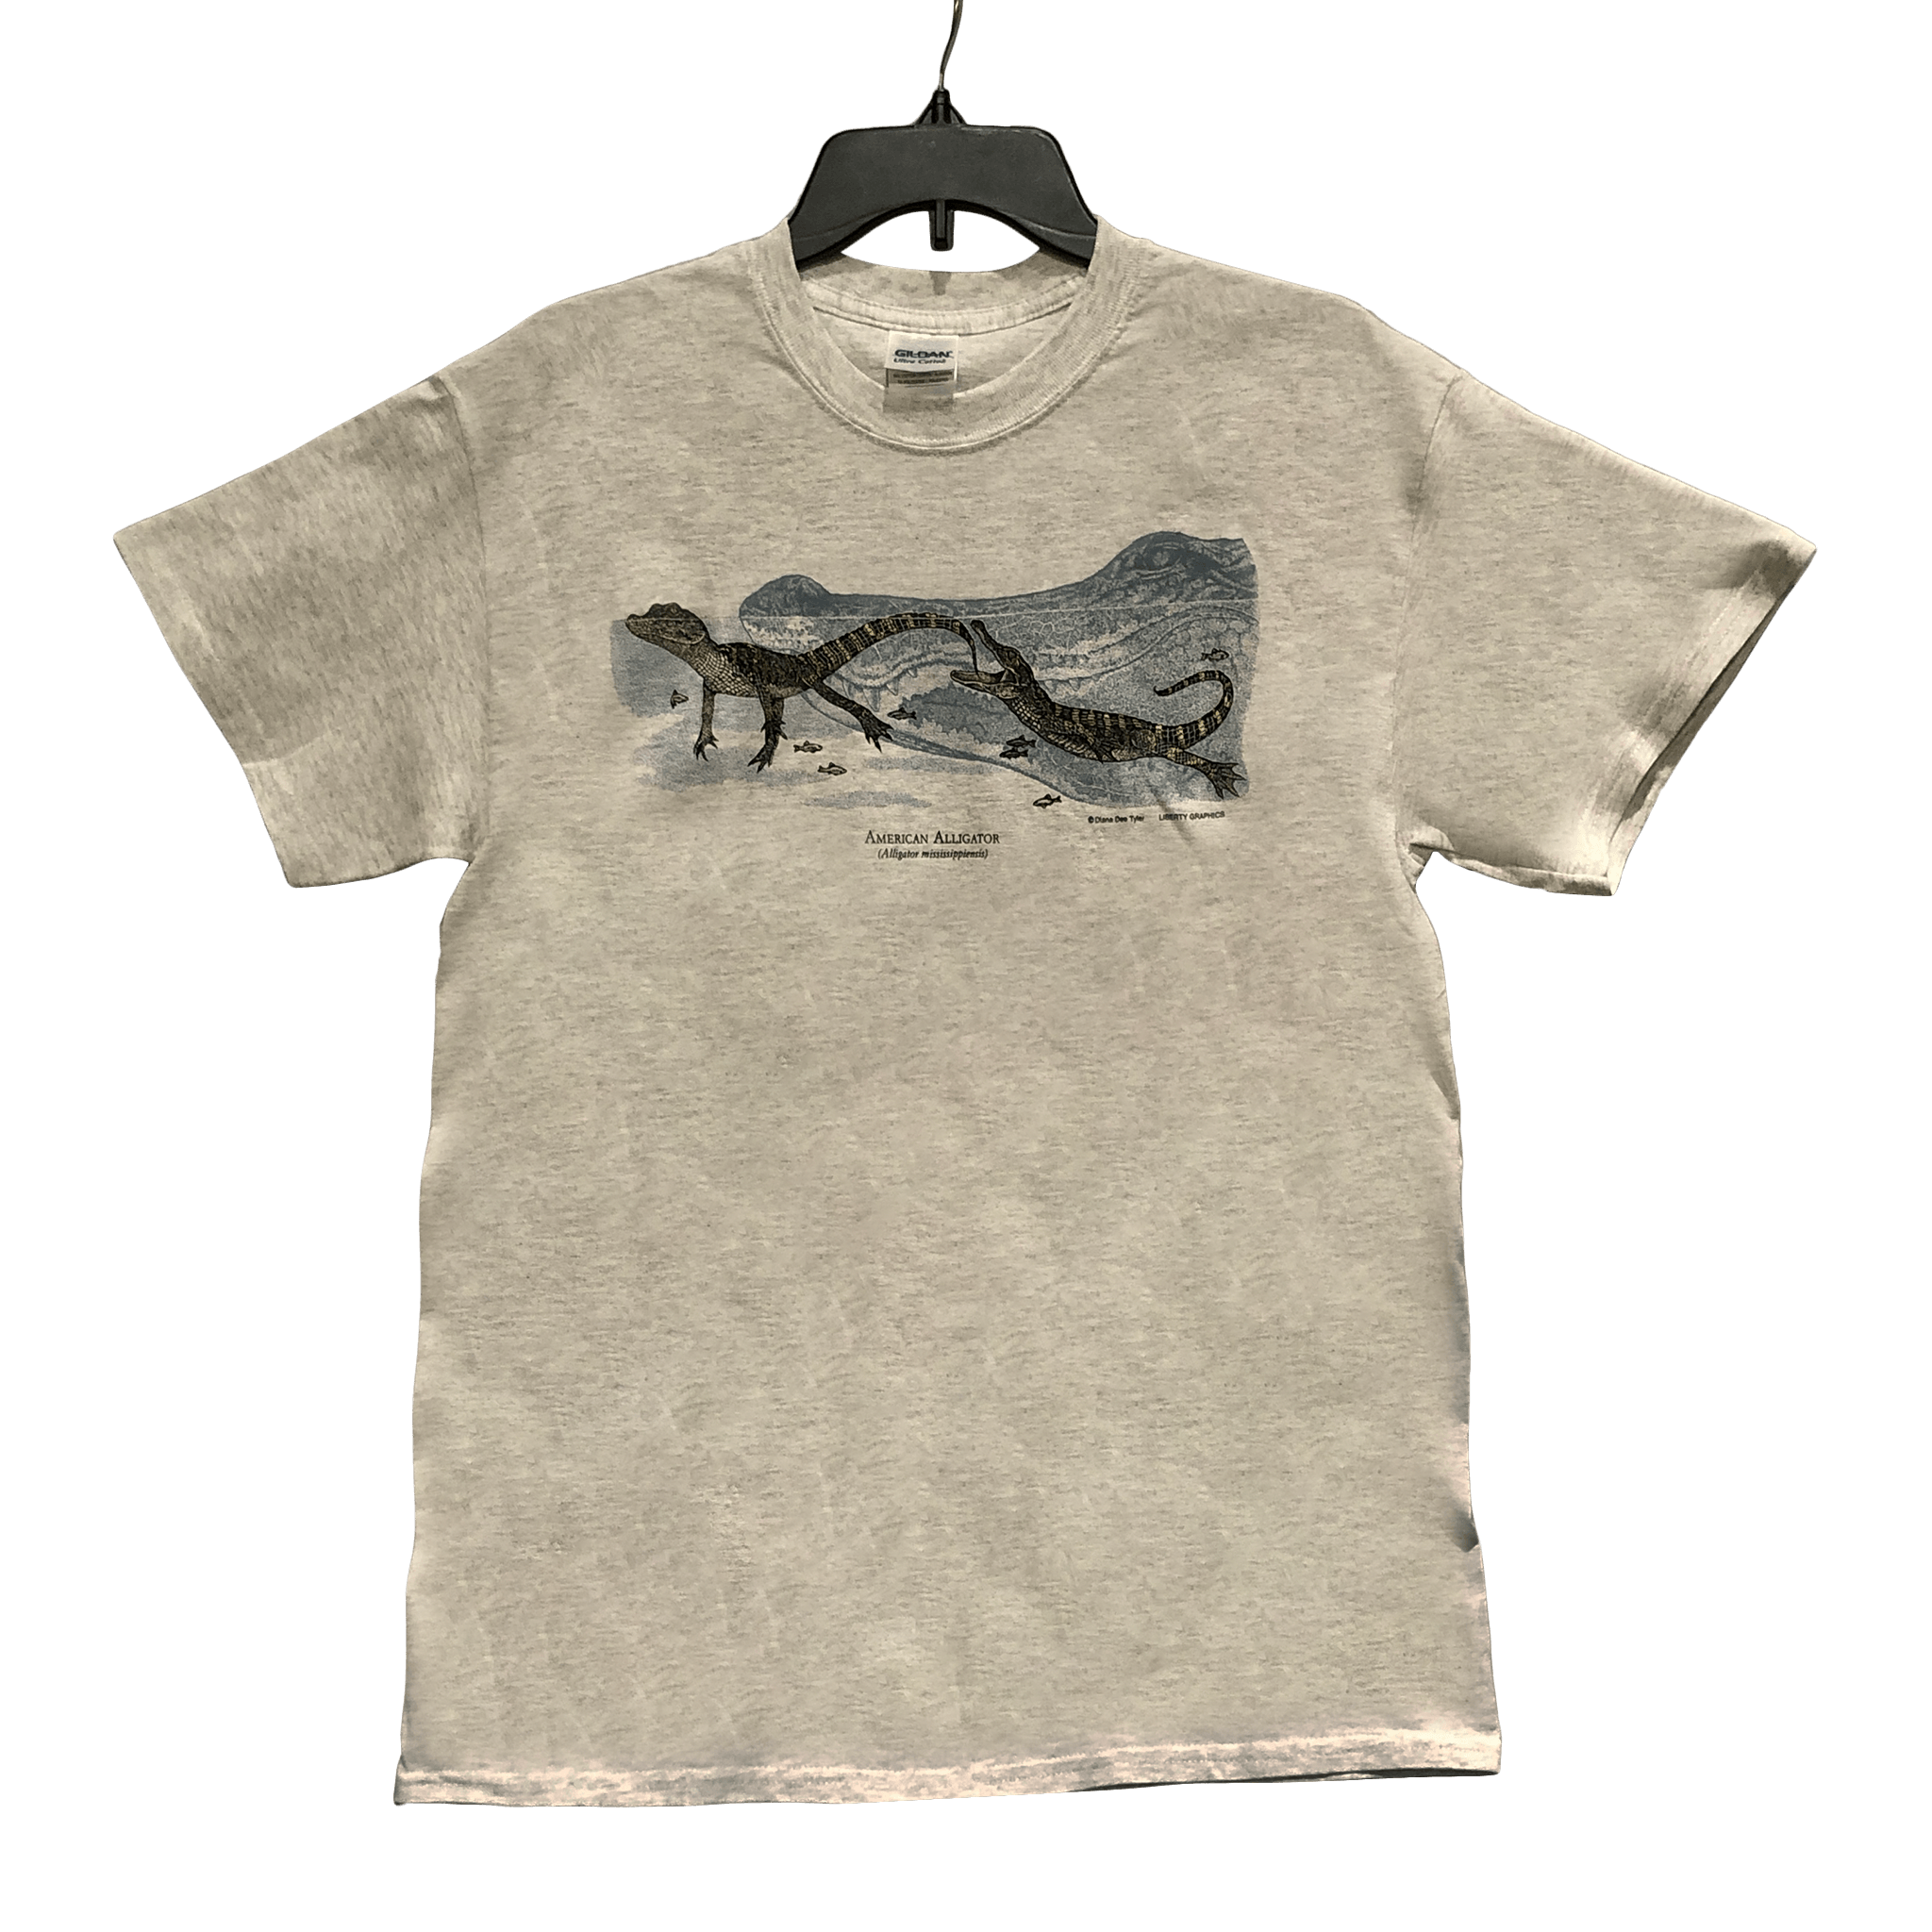 Baby Alligators T-Shirt (Adult) - Do you see all three gators? Mom too? Only S shirts remain of this beautiful but discontinued design.